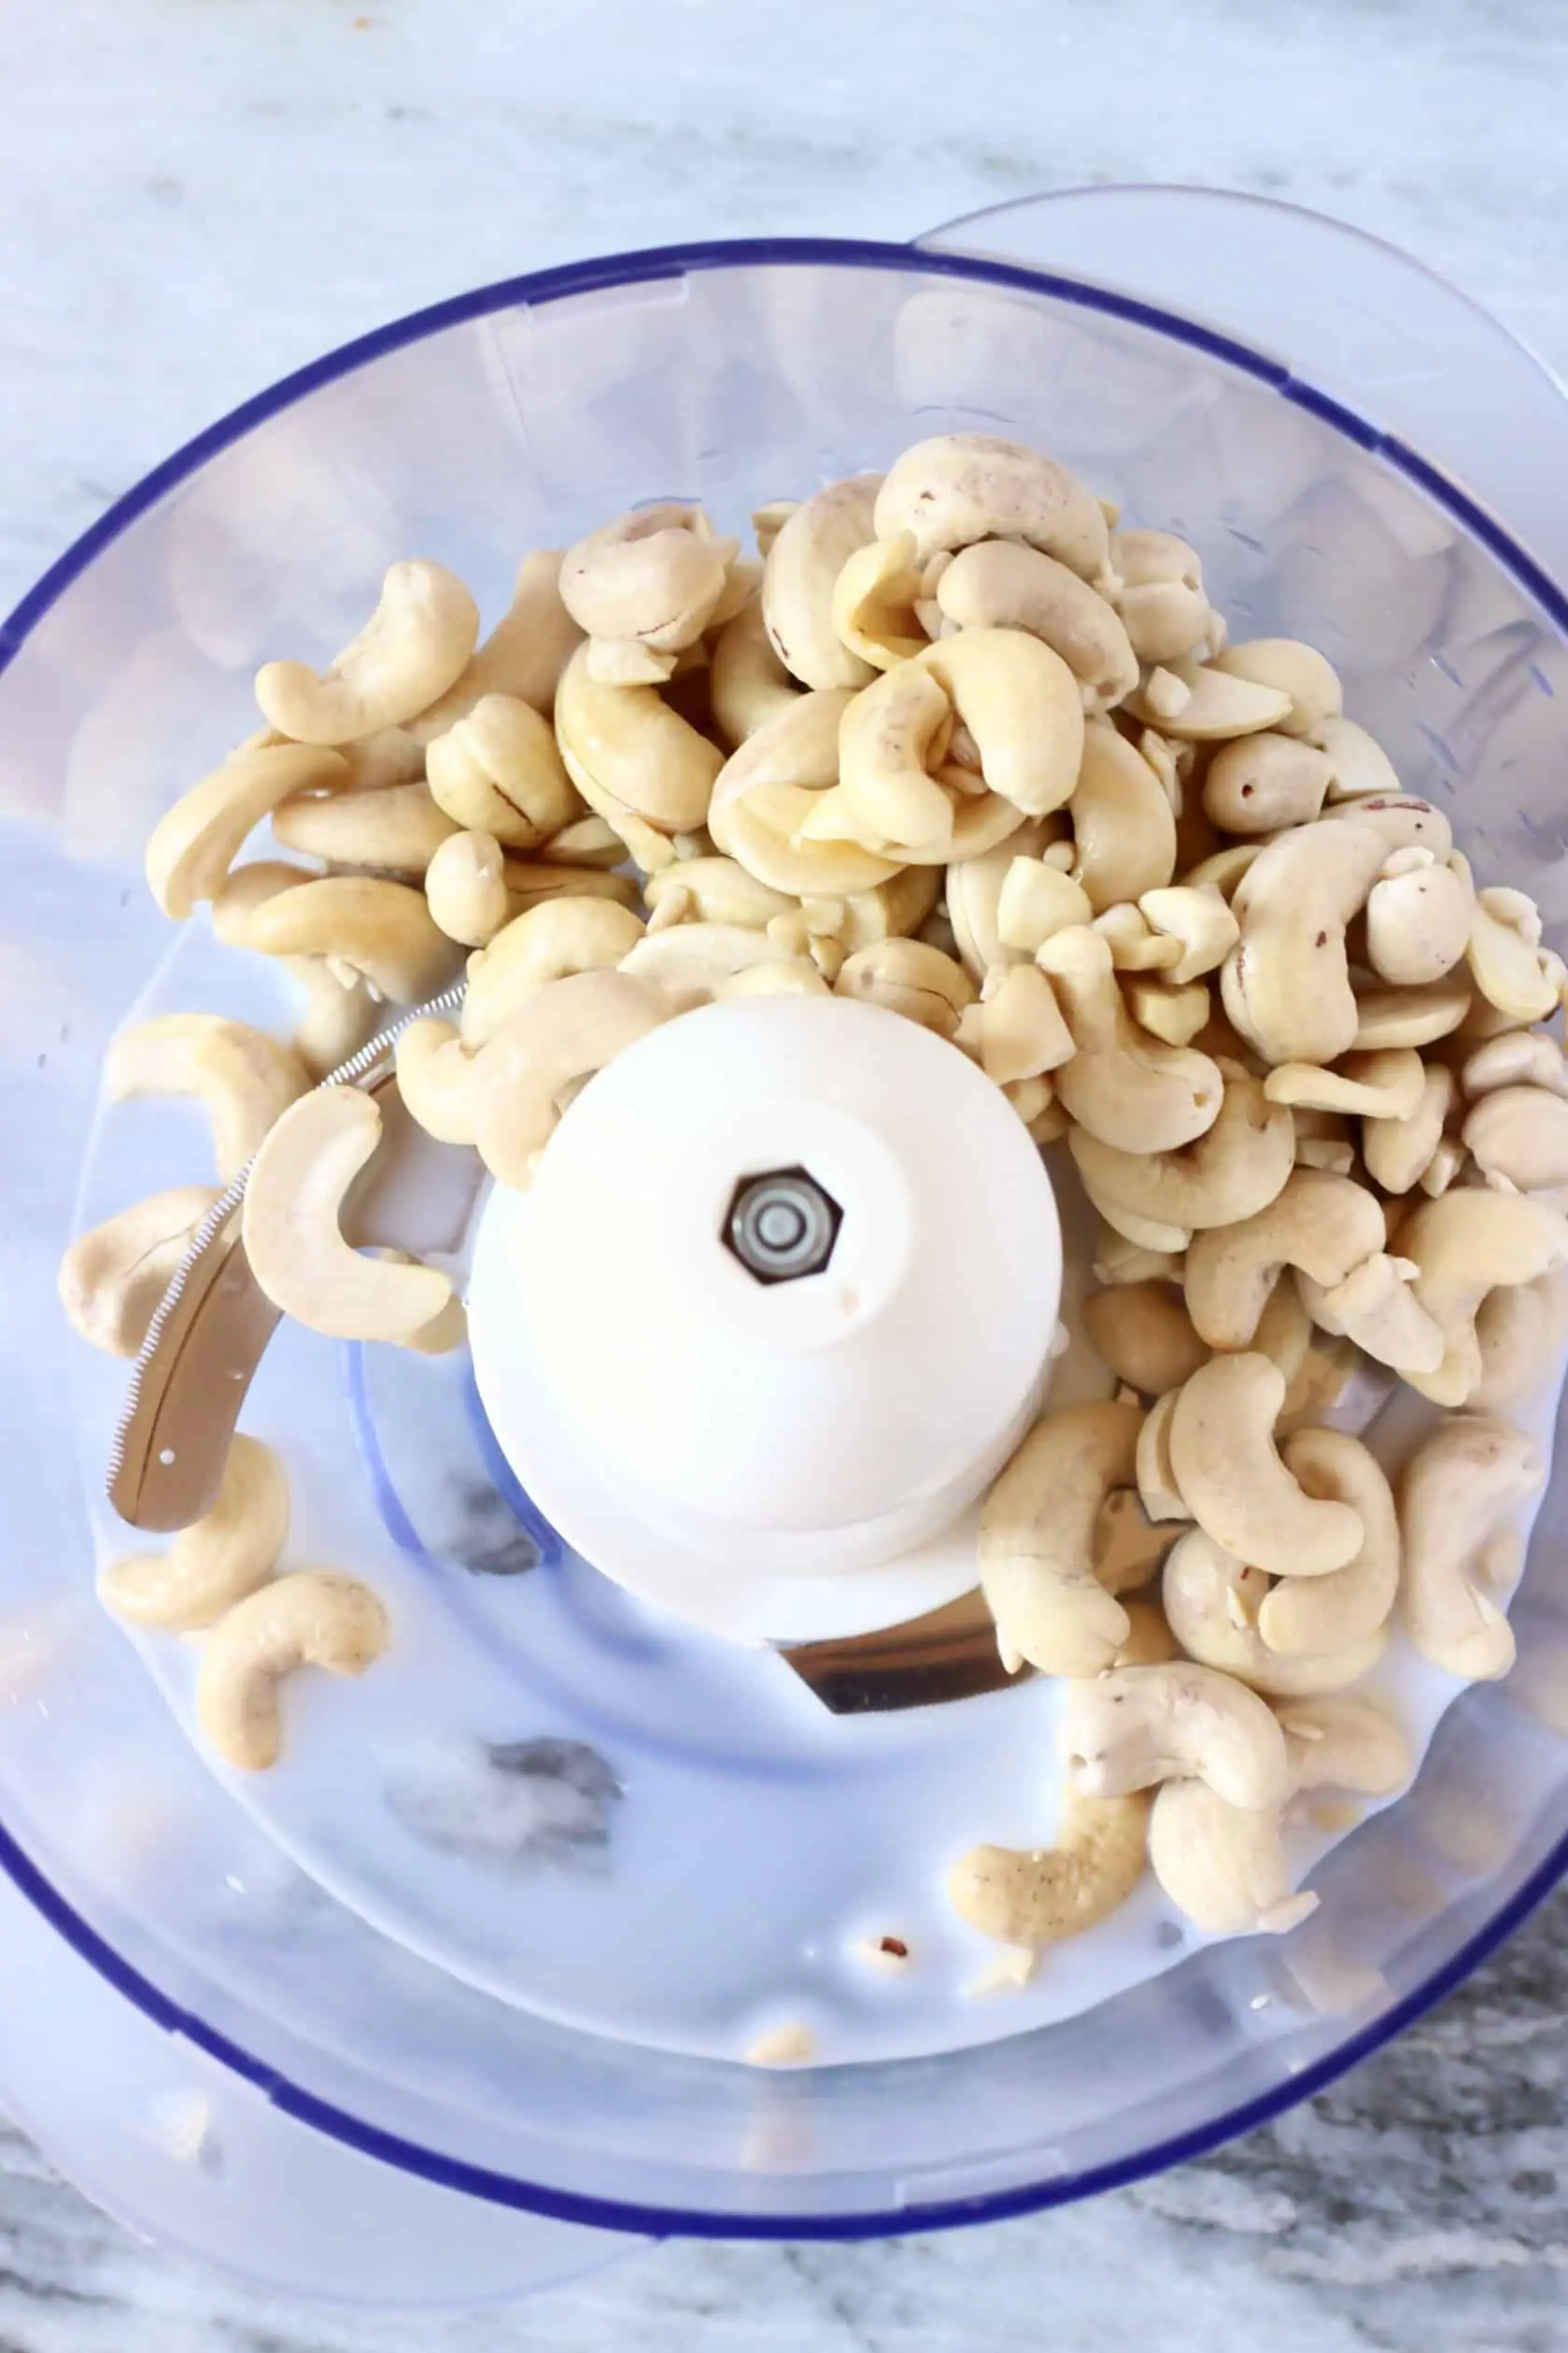 Cashew nuts in a food processor against a marble background